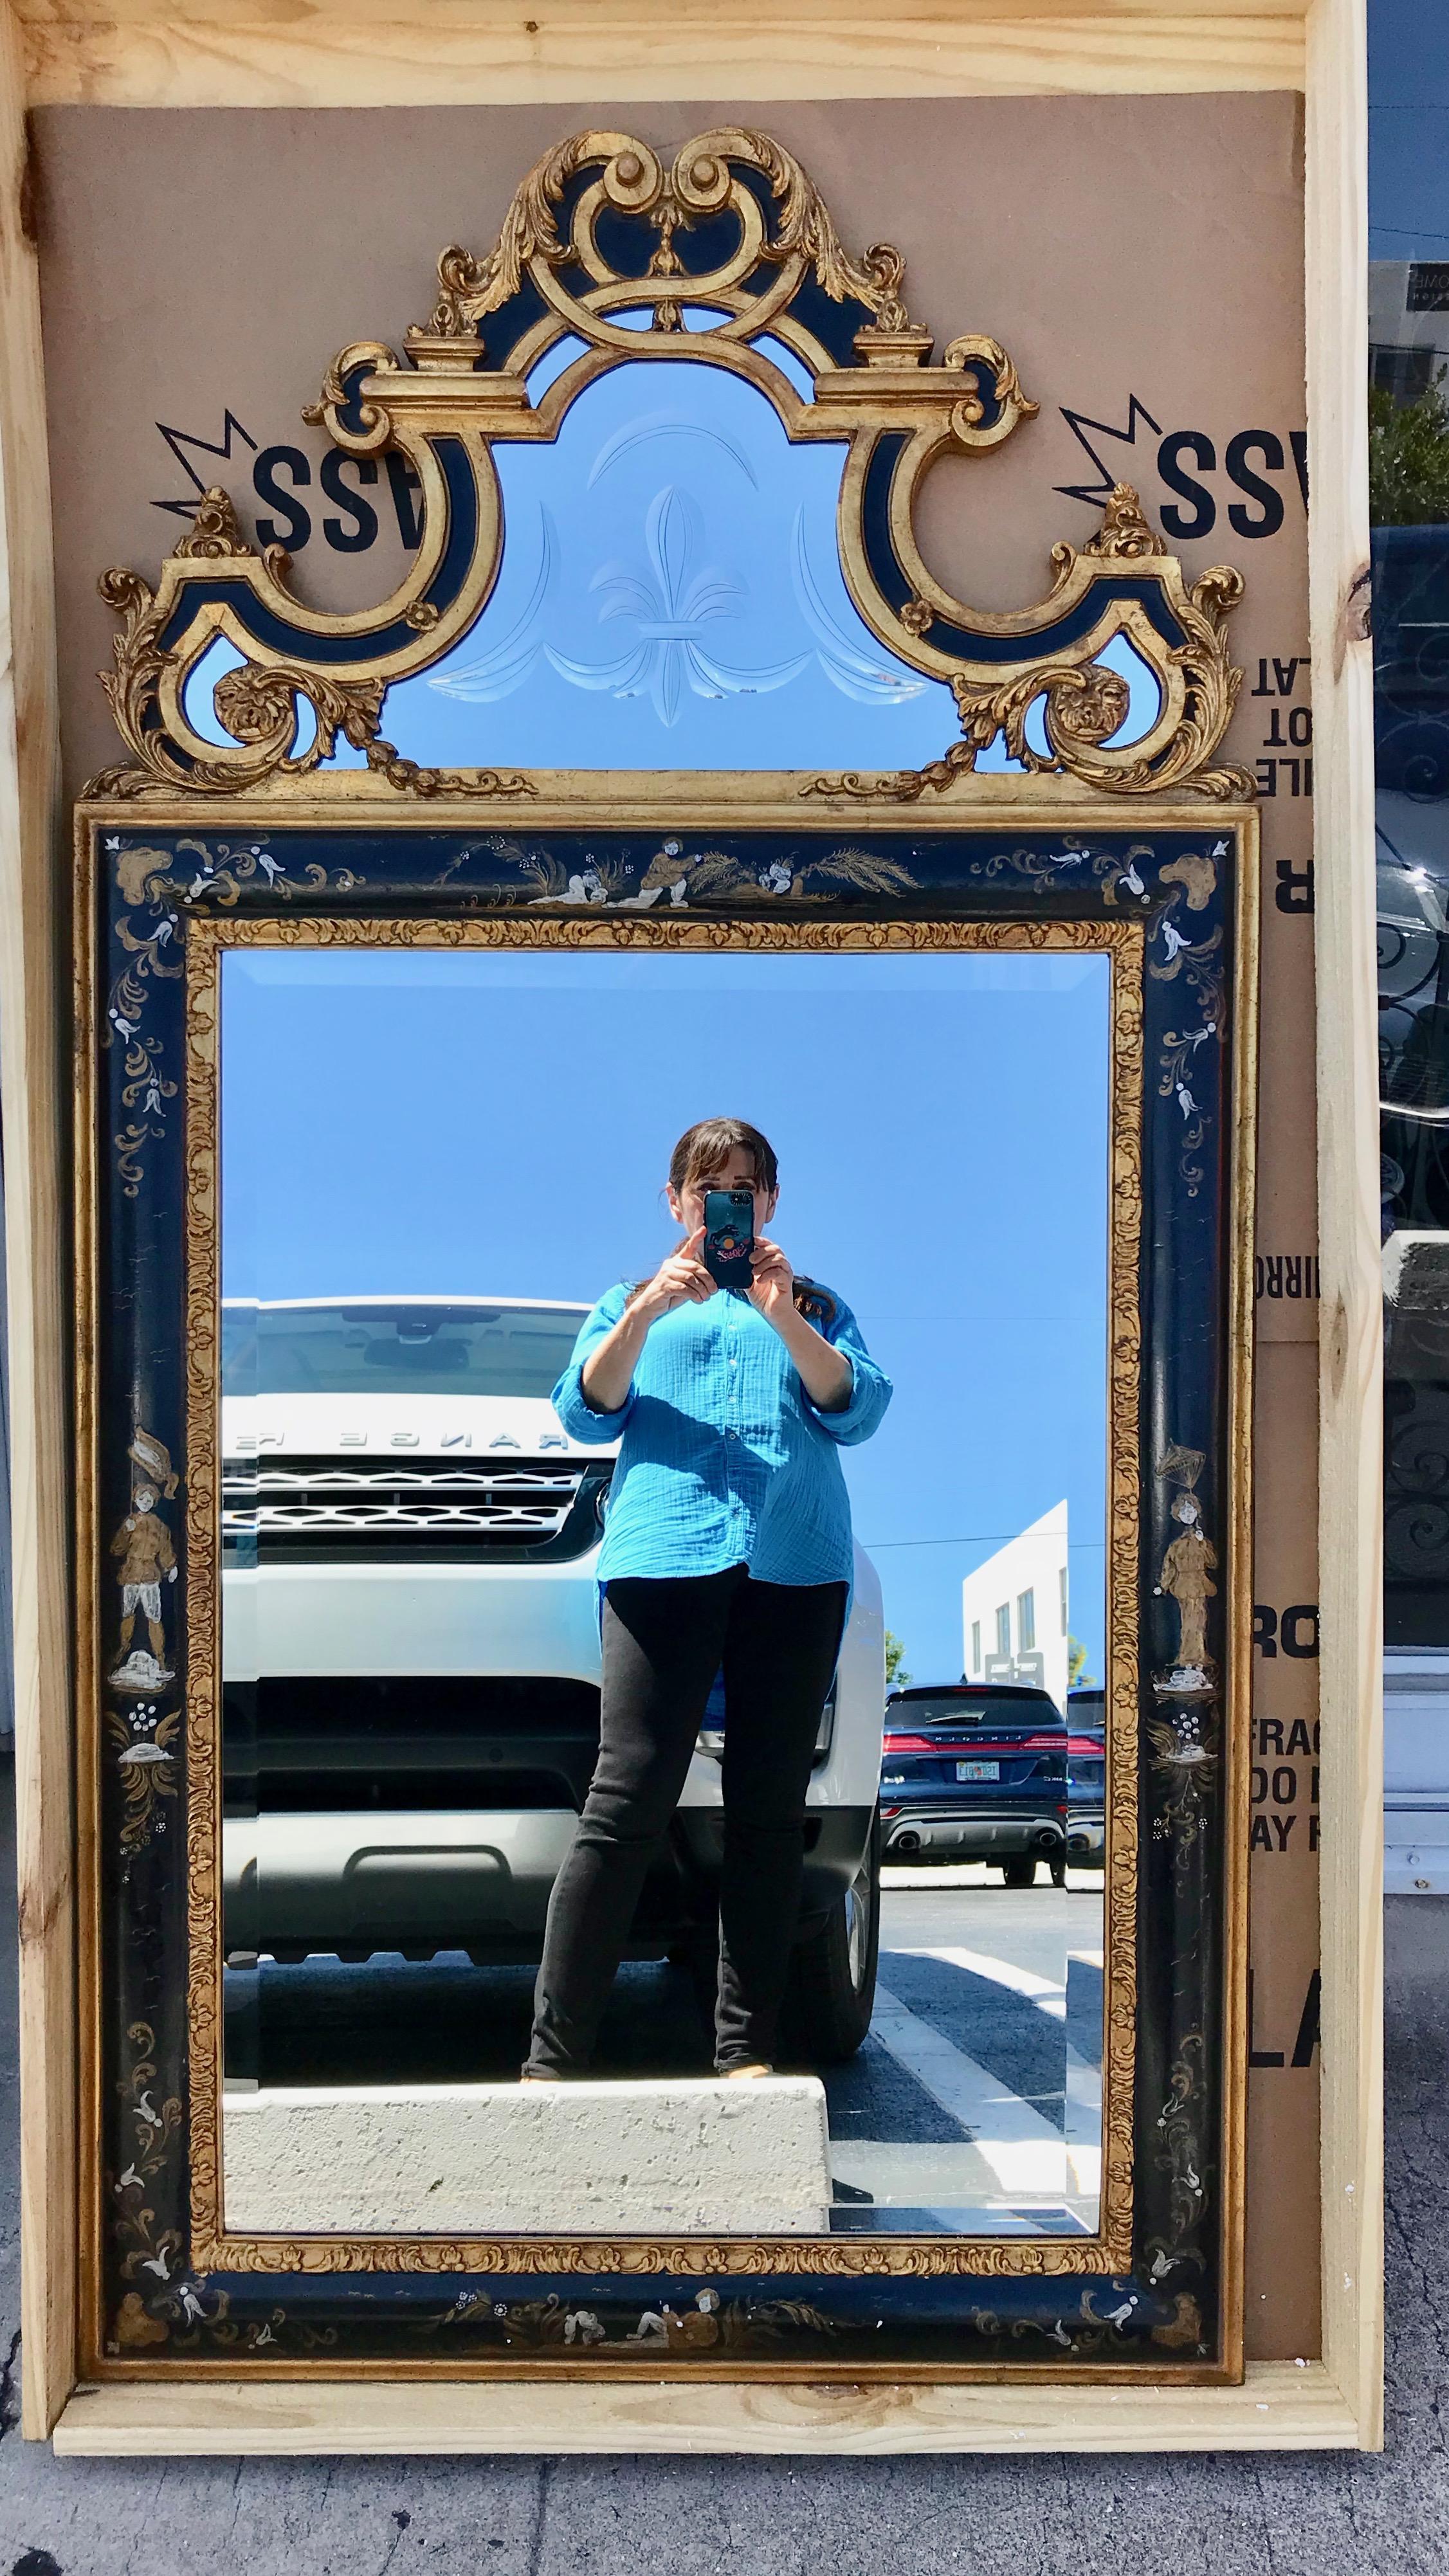 Fine Regency style mirrors with elaborate crowns inset with fabulous Fleur de Lis etched glass and gilt appointments. The frames are painted with figures and flora surrounding the bevelled glass. Superior chinoiserie design.
The mirrors are